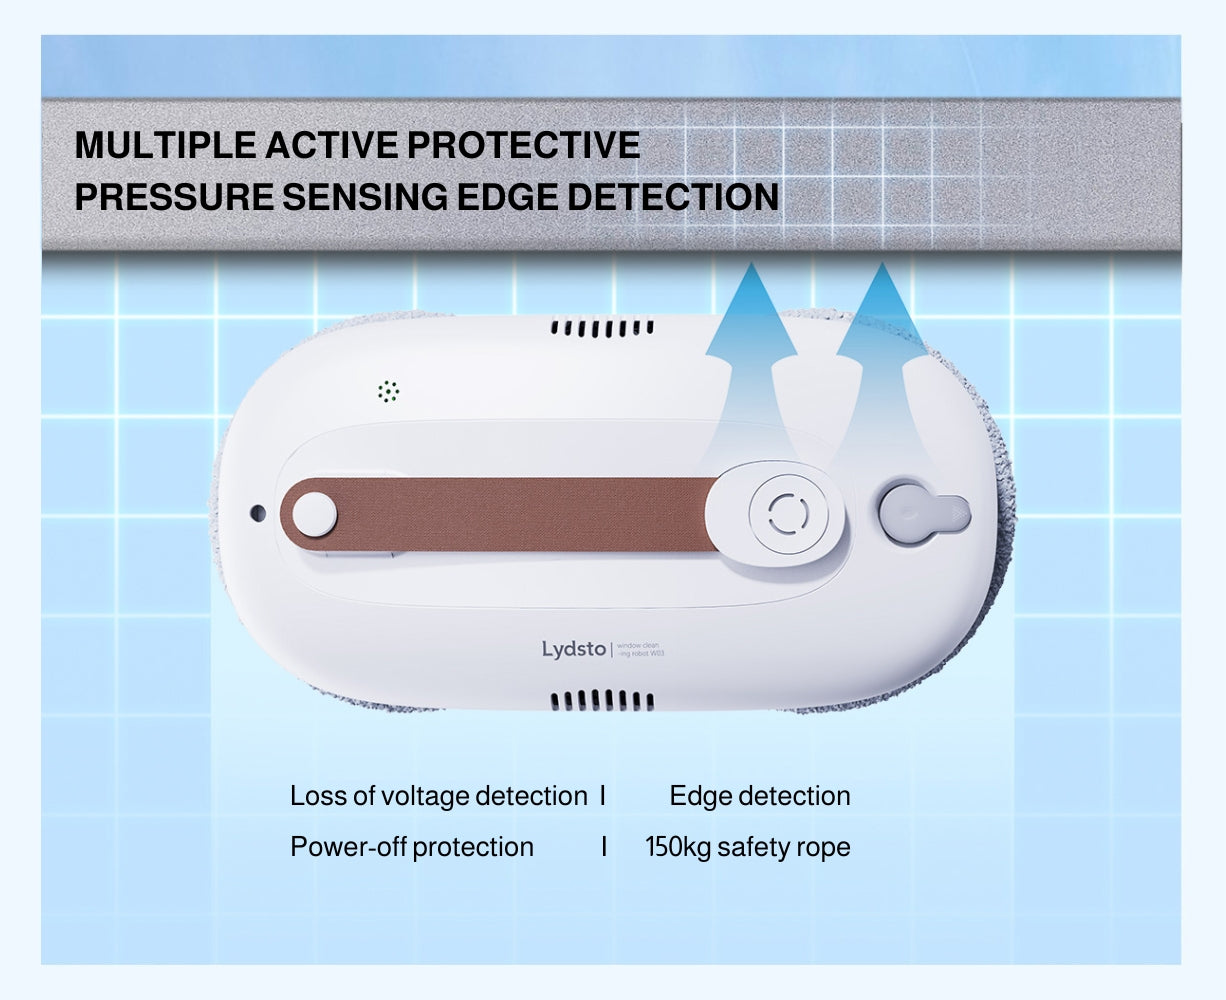 MULTIPLE ACTIVE PROTECTIVE PRESSURE SENSING EDGE DETECTION  Loss of voltage detection | Edge detection | Power-off protection | 150kg safety rope